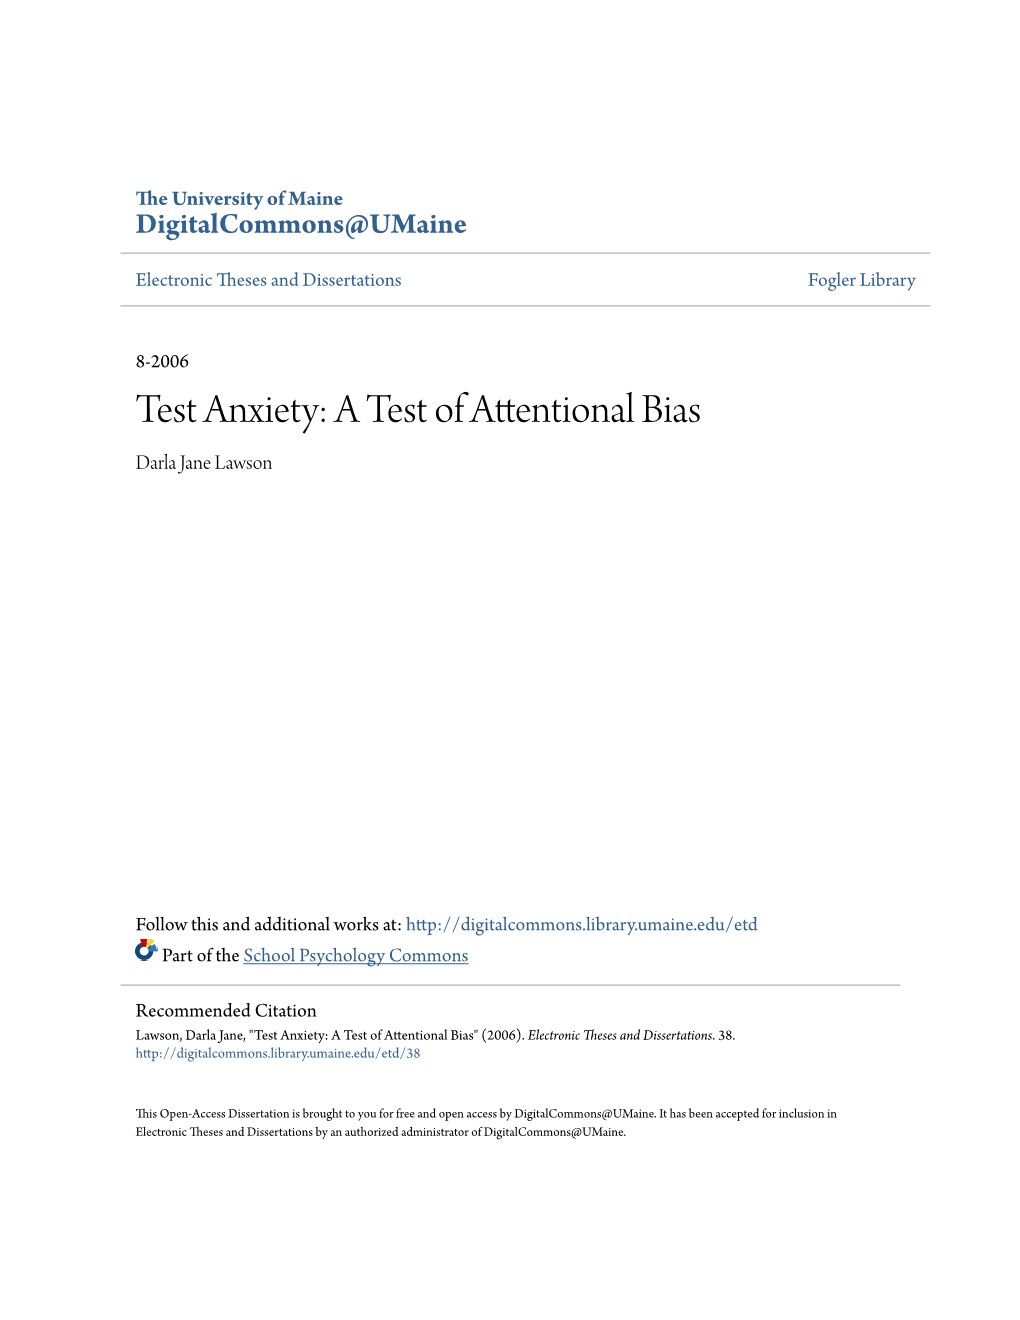 Test Anxiety: a Test of Attentional Bias Darla Jane Lawson